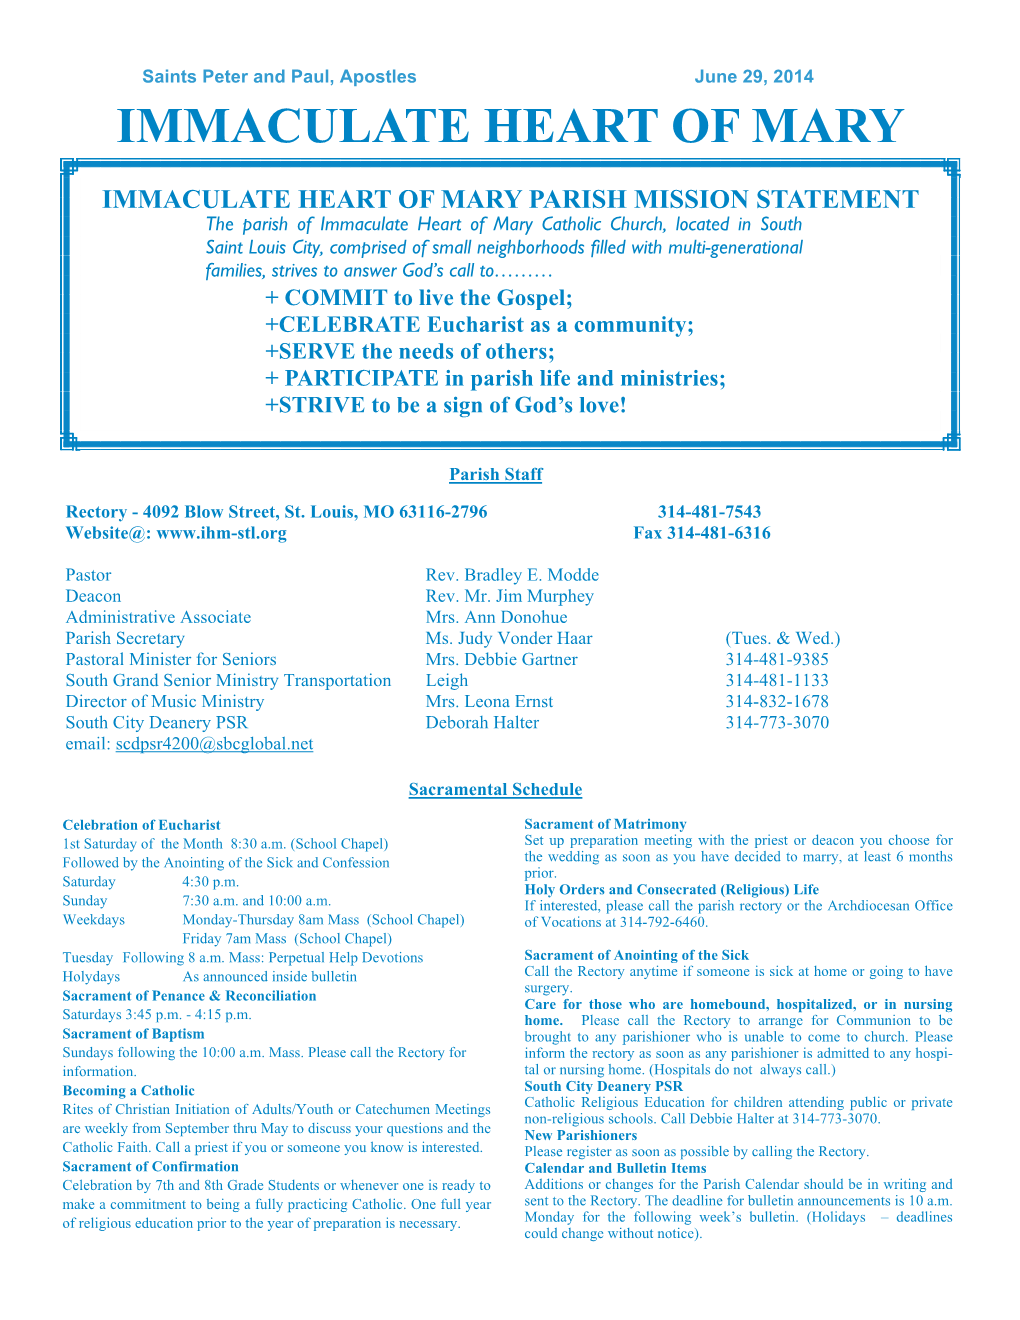 Immaculate Heart of Mary Parish Mission Statement